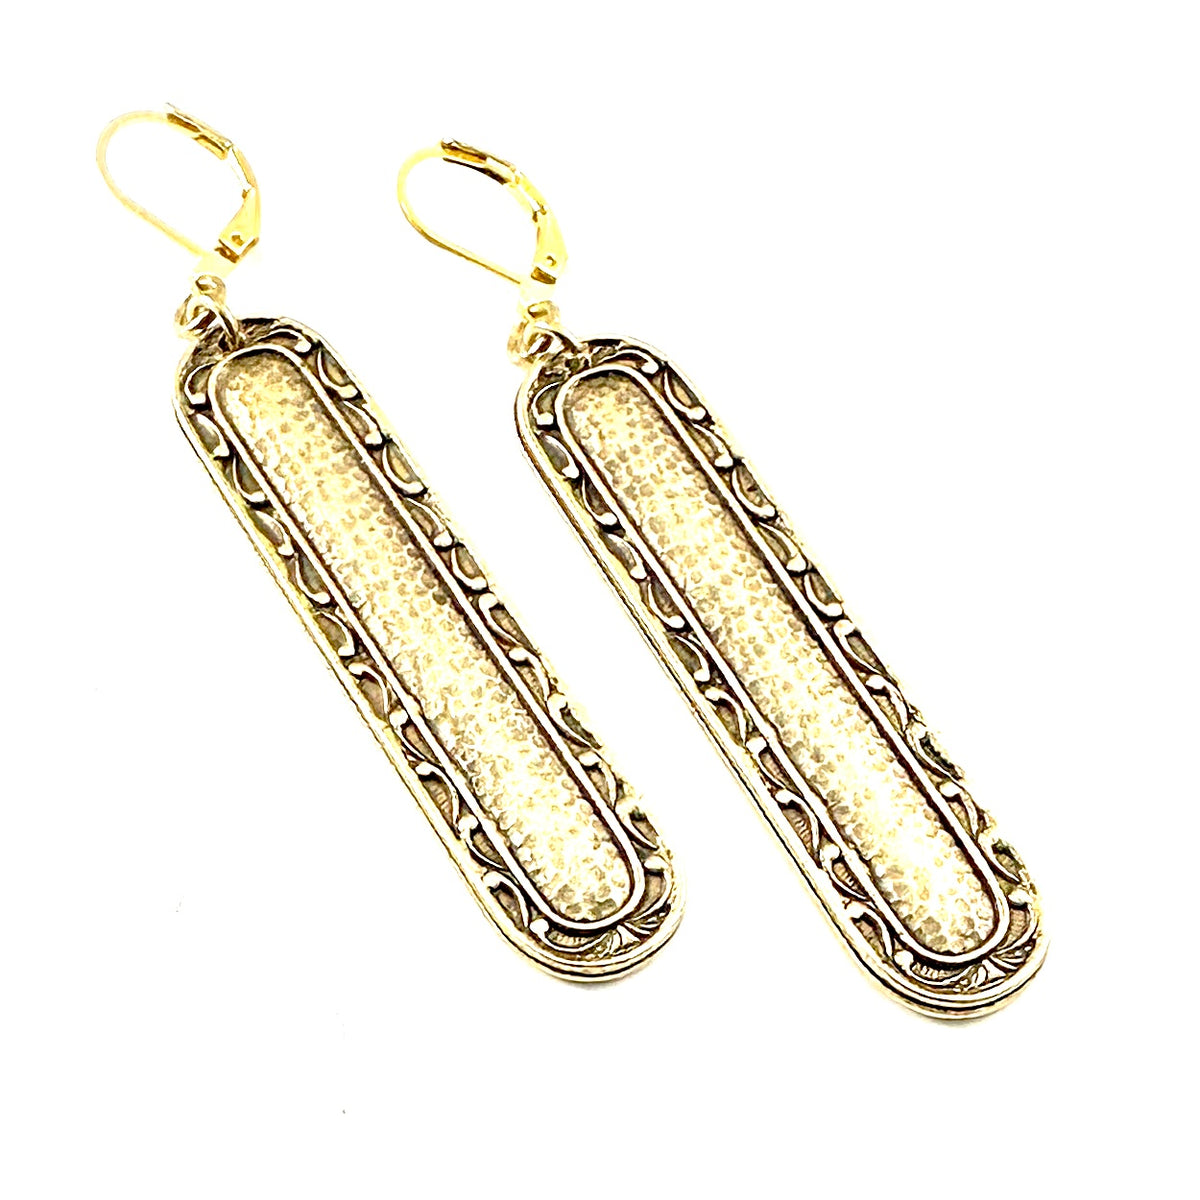 Vintage Casting Collection - Elongated Oval Earrings